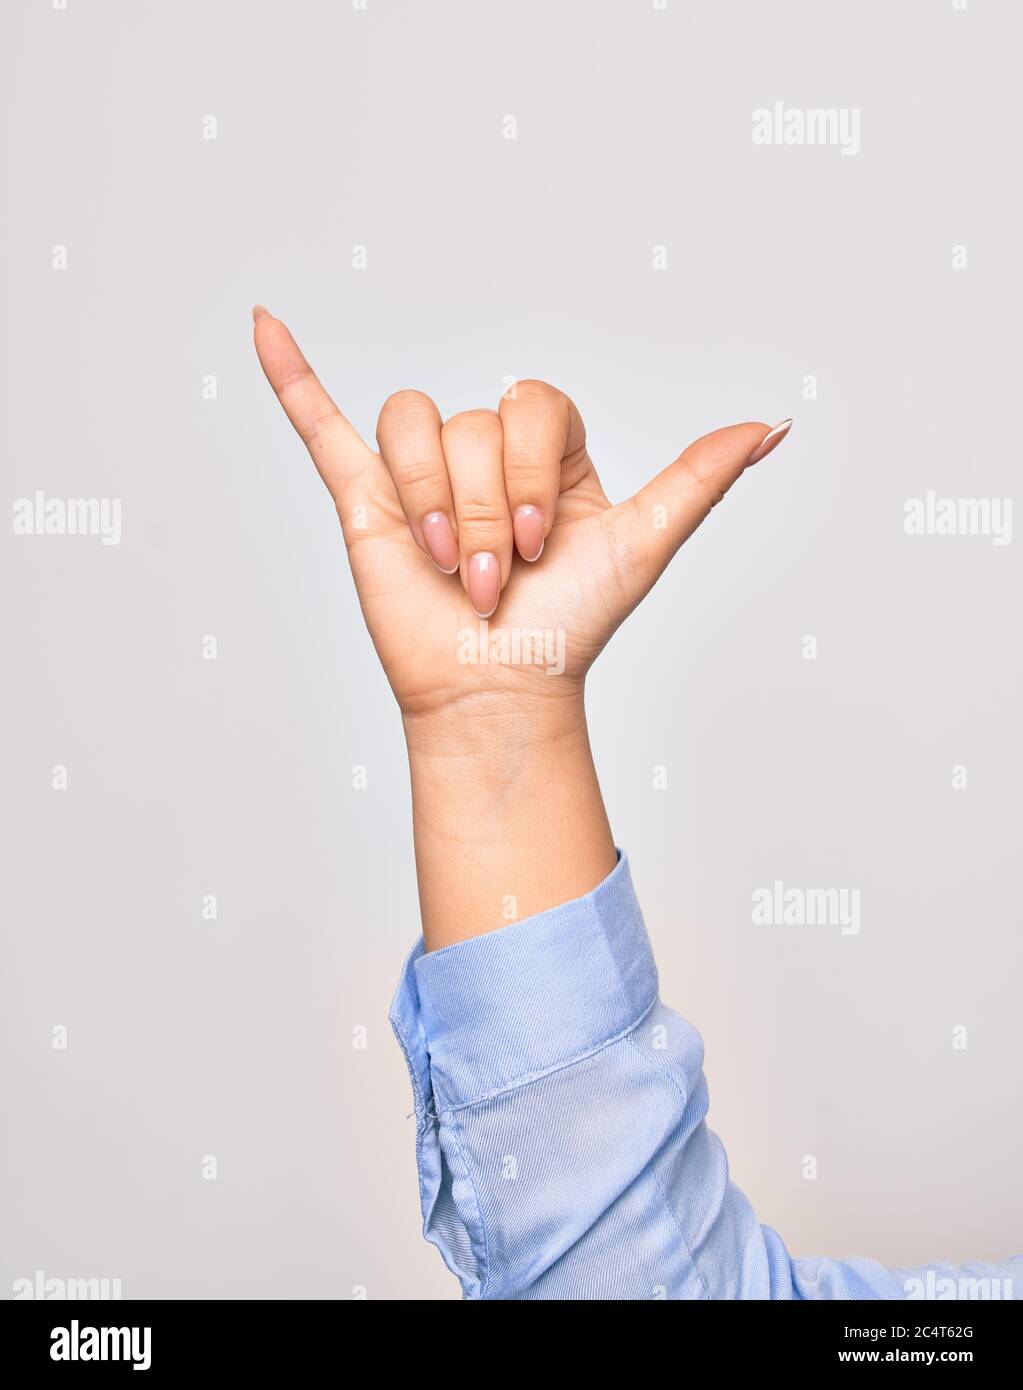 Hand of caucasian young woman doing surf salutation. Showing fingers doing telephone sign over isolated white background Stock Photo